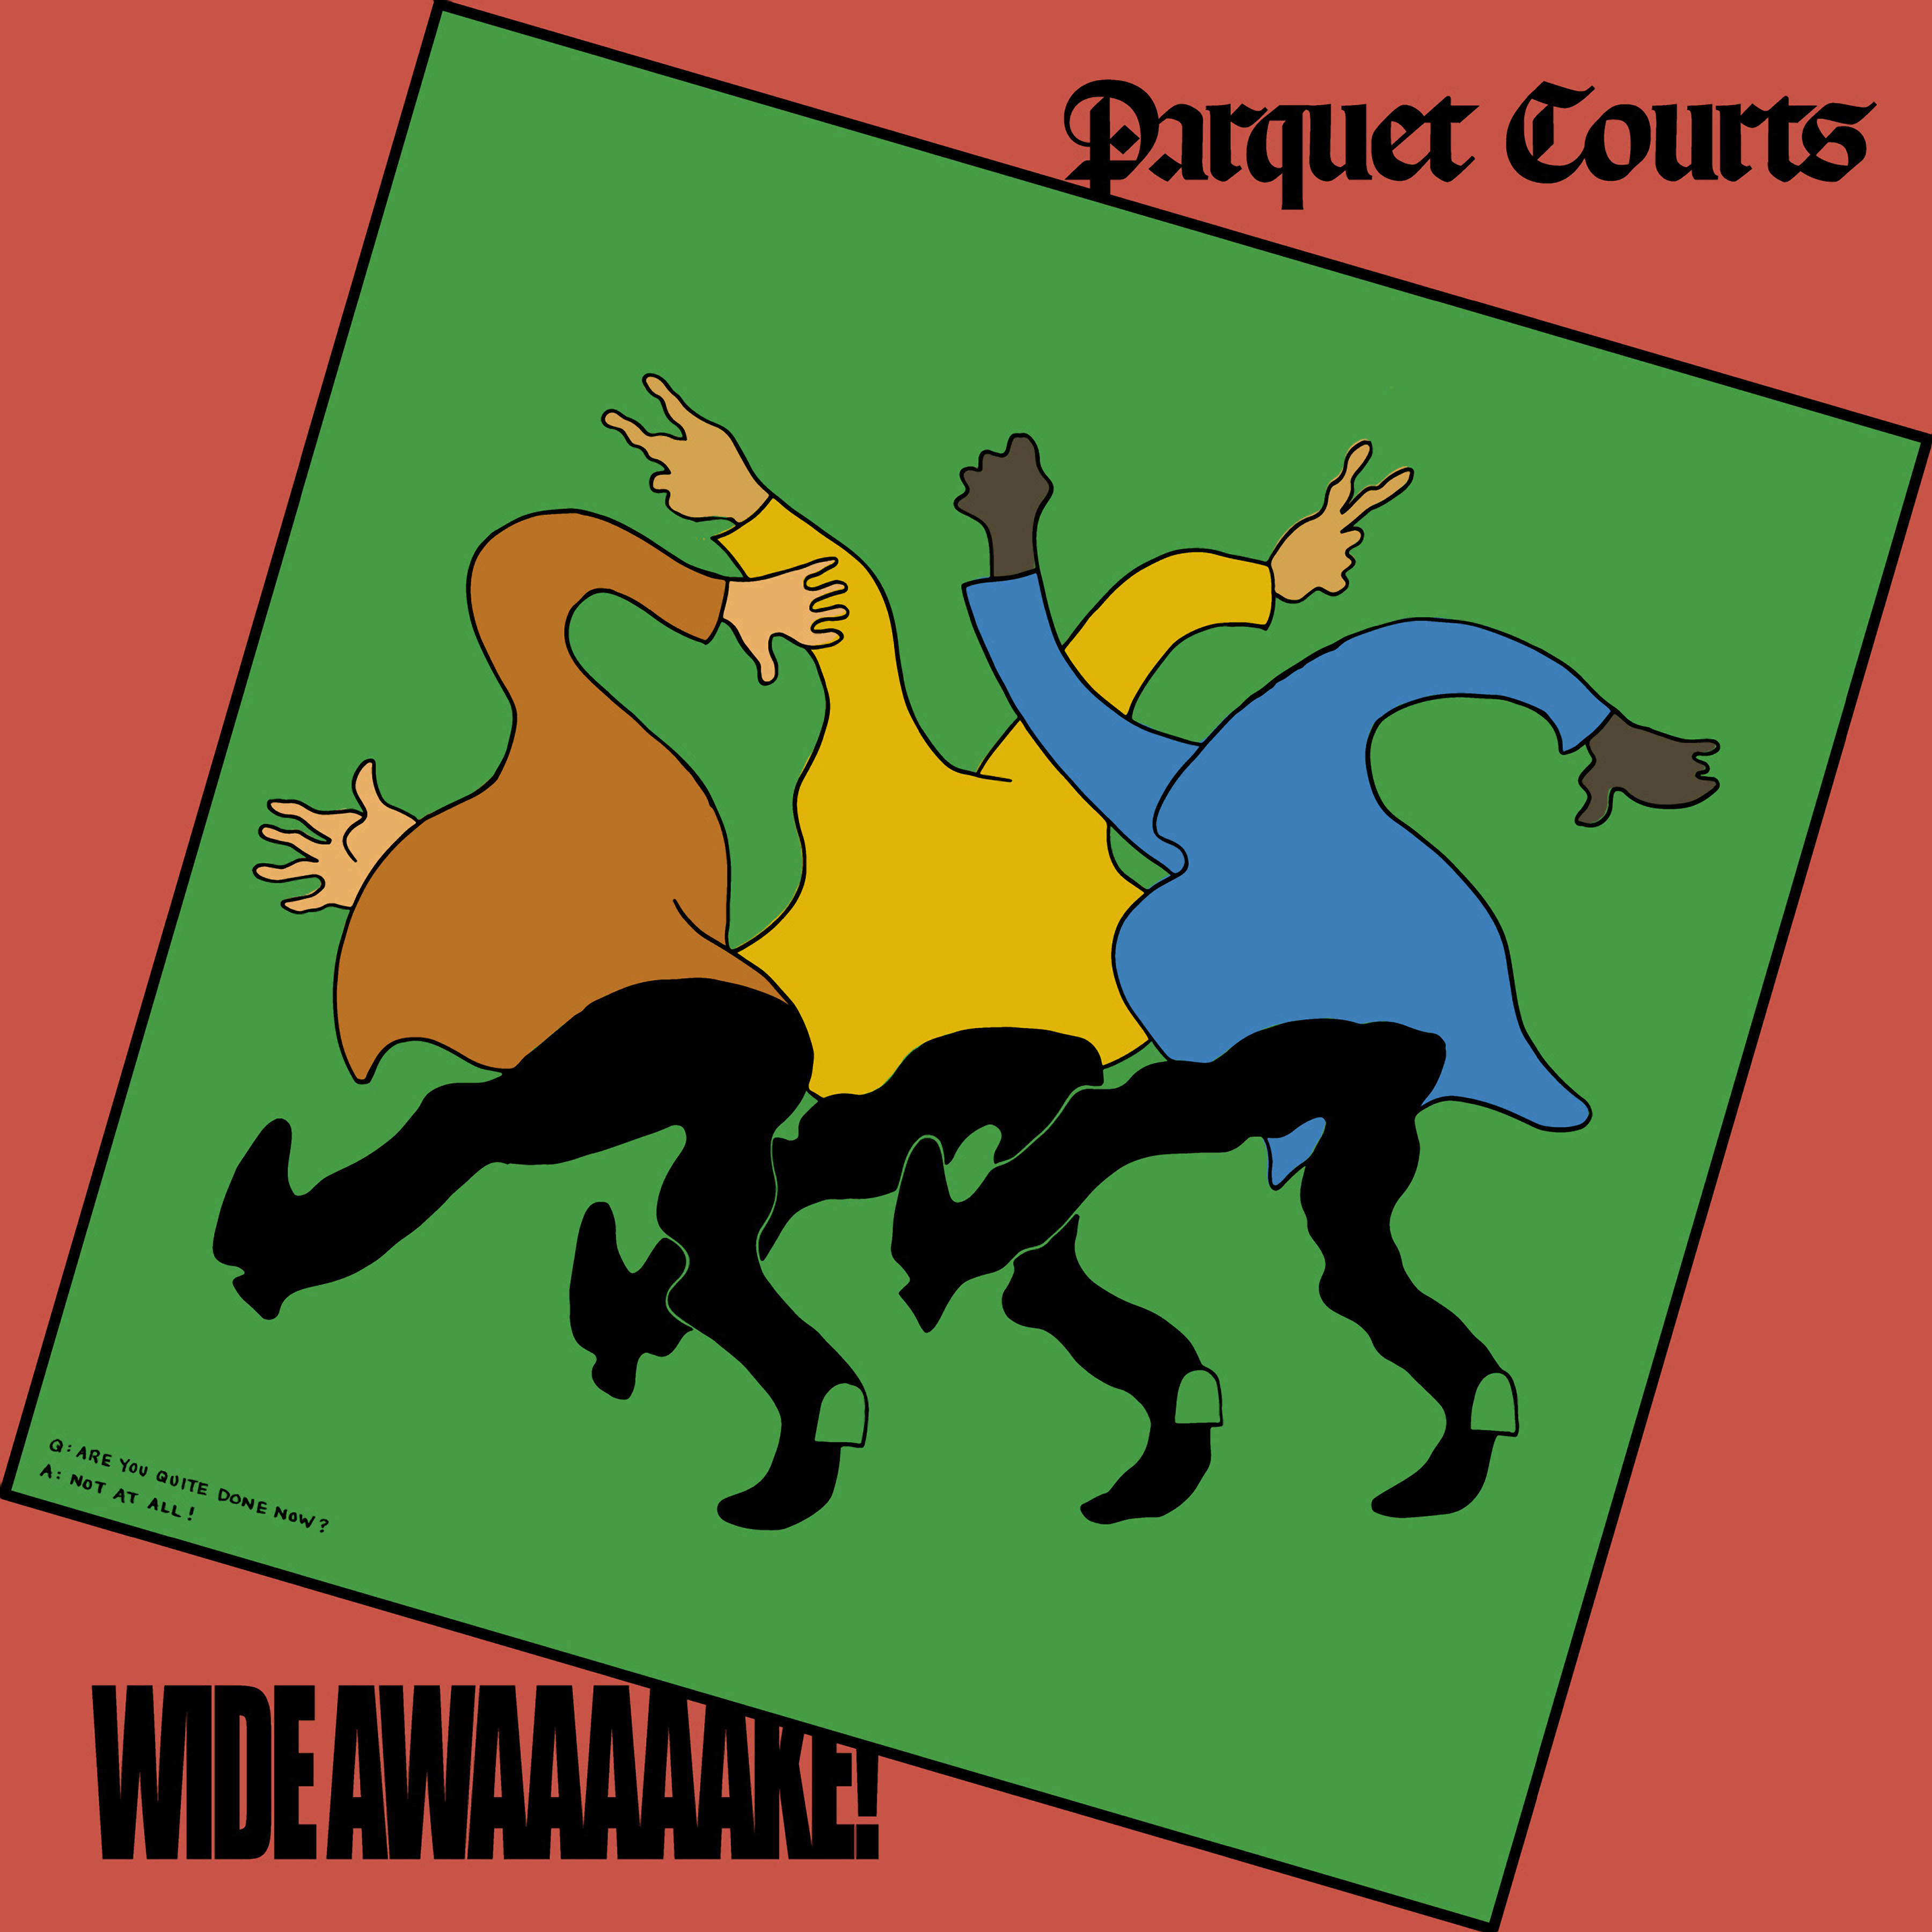 Parquet Courts Announce New Album <i>Wide Awake!</i>, Release “Almost Had to Start a Fight/In and Out of Patience”” title=”RT001_Parquet_Courts_Wide_Awake-1519311286″ data-original-id=”279517″ data-adjusted-id=”279517″ class=”sm_size_full_width sm_alignment_center ” data-image-source=”free_stock” /></p>
<p><strong>Parquet Courts, <em>Wide Awake! </em>track list<br />
</strong>1. “Total Football”<br />
2. “Violence”<br />
3. “Before the Water Gets Too High”<br />
4. “Mardi Gras Beads”<br />
5. “Almost Had to Start a Fight/In and Out of Patience”<br />
6. “Freebird II”<br />
7. “Normalization”<br />
8. “Back to Earth”<br />
9. “Wide Awake”<br />
10. “NYC Observation”<br />
11. “Extinction”<br />
12. “Death Will Bring Change”<br />
13. “Tenderness”</p>
</p><p>To see our running list of the top 100 greatest rock stars of all time, <a href=